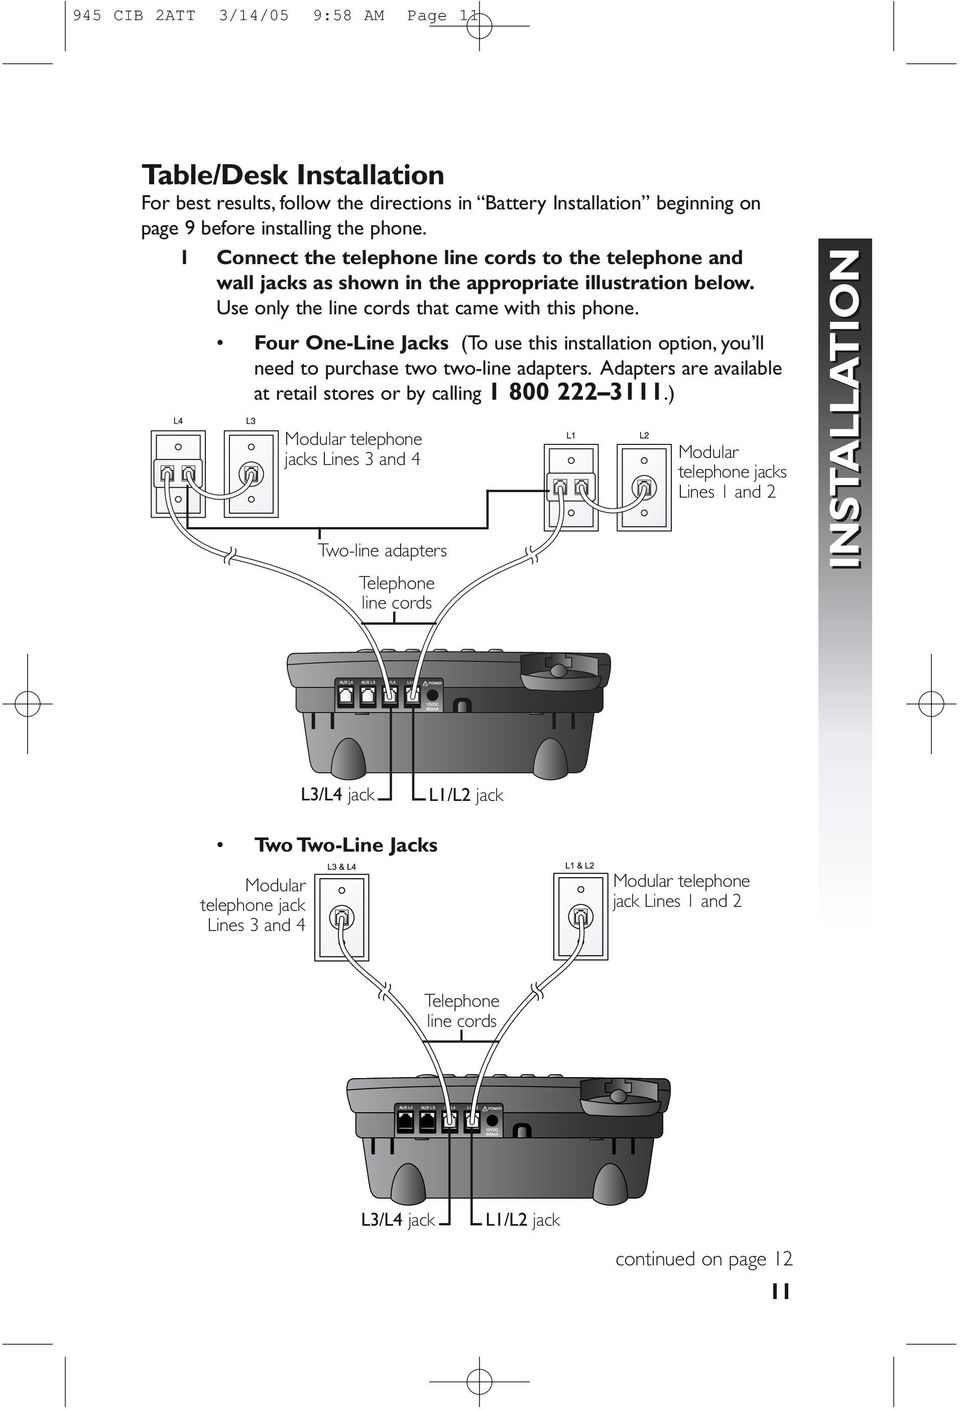 Four One-Line Jacks (To use this installation option, you ll need to purchase two two-line adapters. Adapters are available at retail stores or by calling 1 800 222 3111.